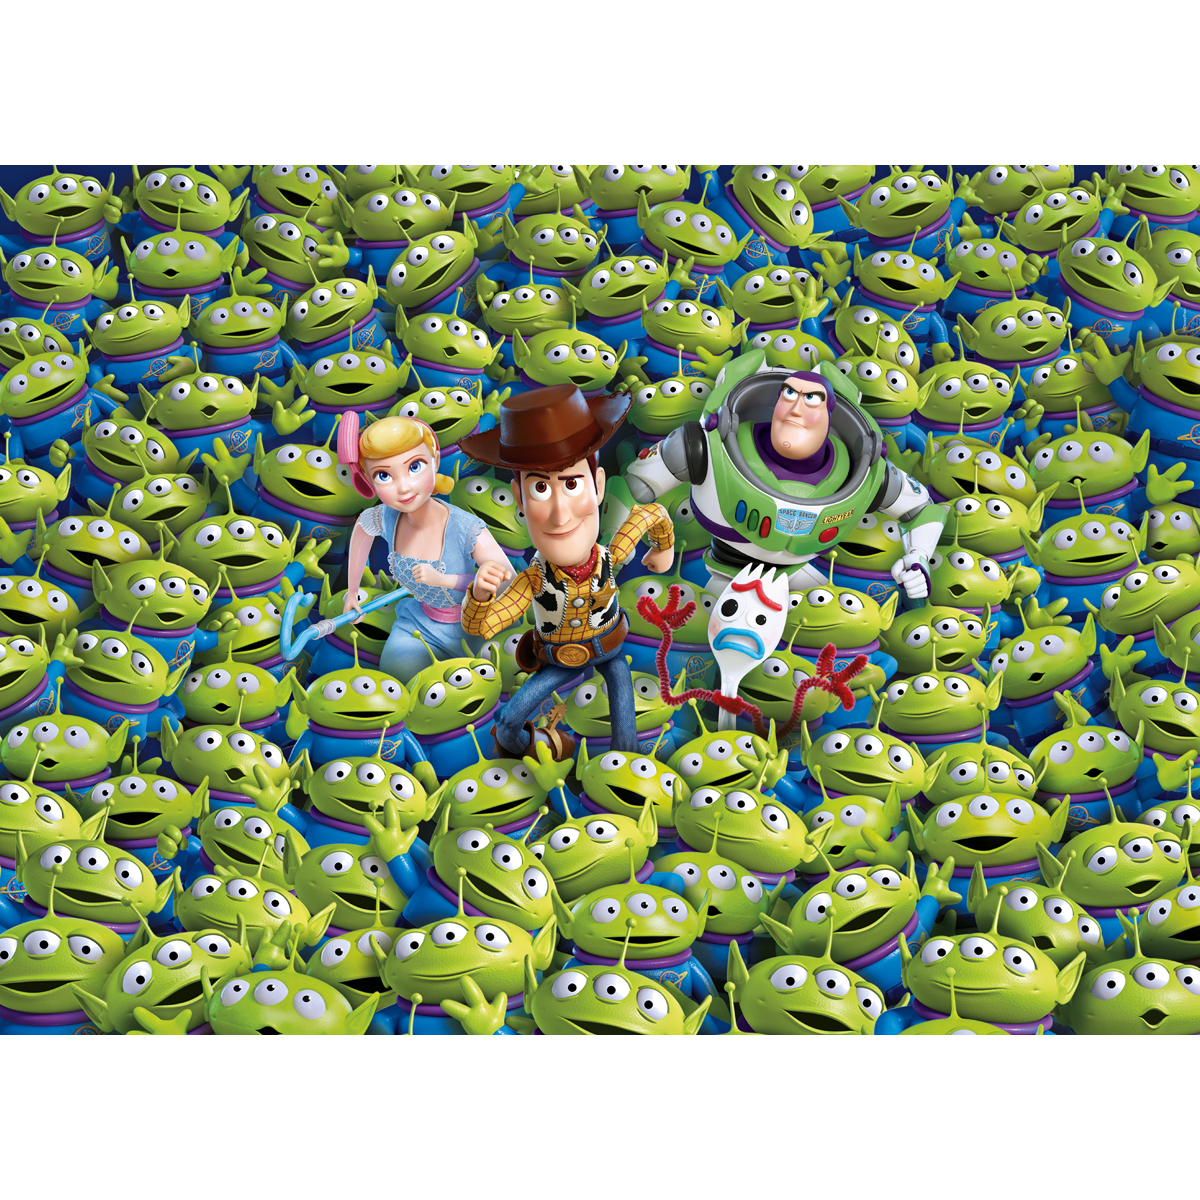 Clementoni - Toy Story 4 Impossible Puzzle